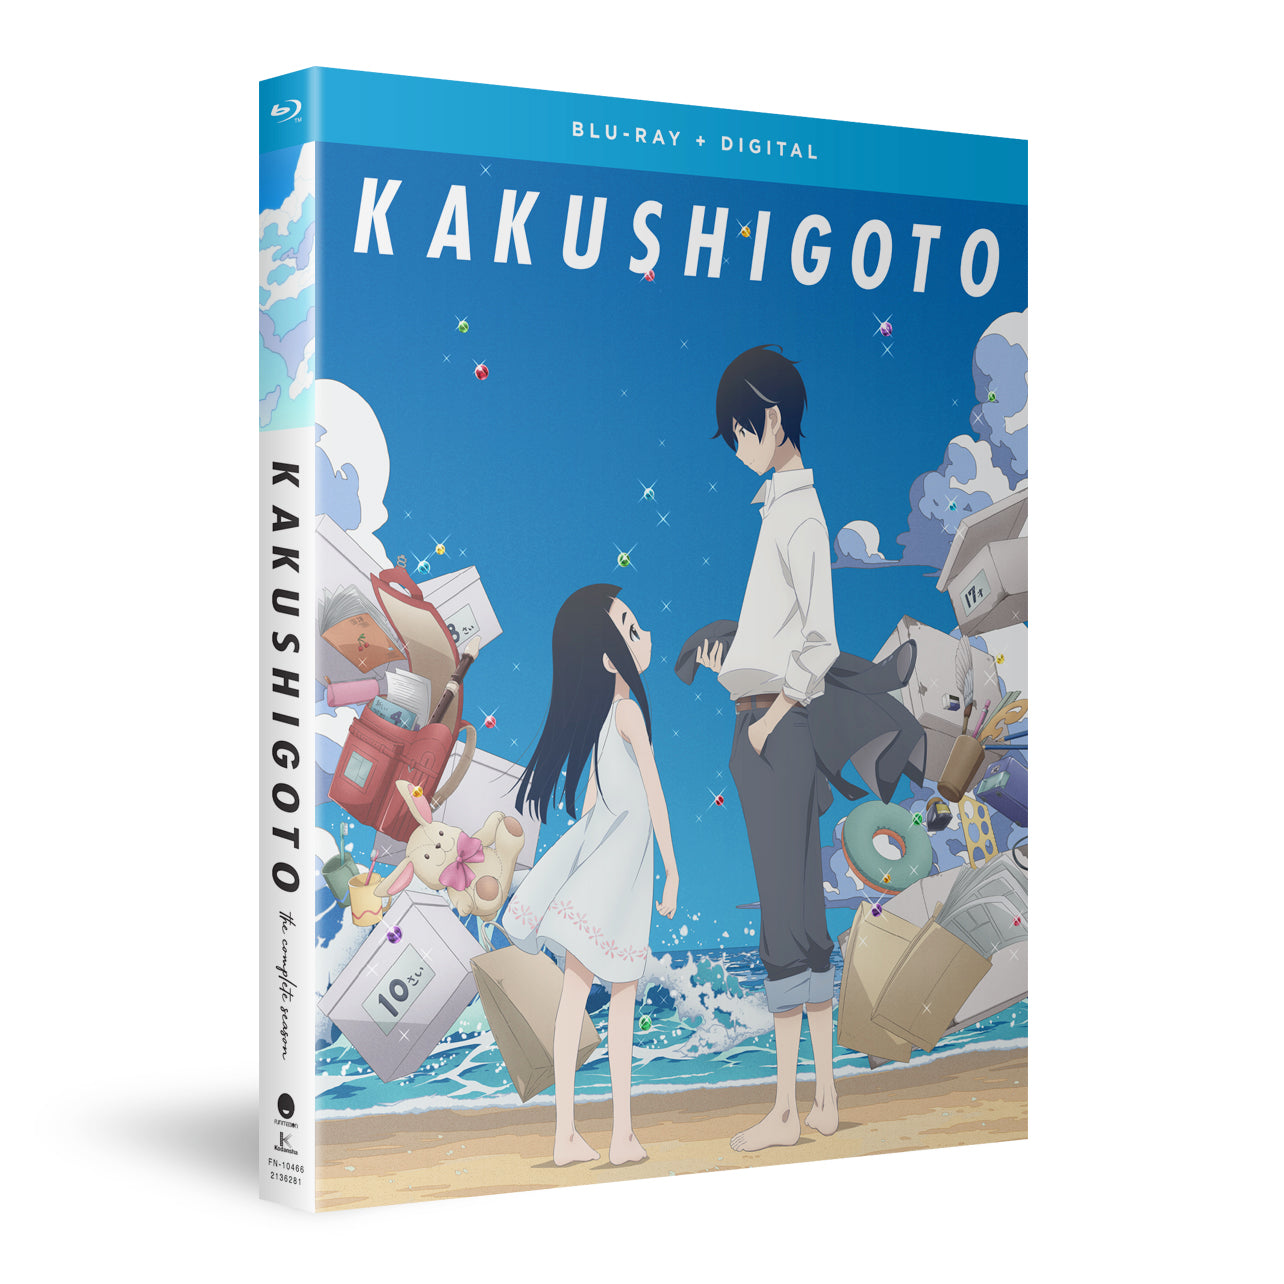 Anime Trending - Anime: Kakushigoto IT'S OK, GUYS! WE GOT A HAPPY ENDING!  And it was the best kind! I was shocked to find out that the mom didn't die  of disease